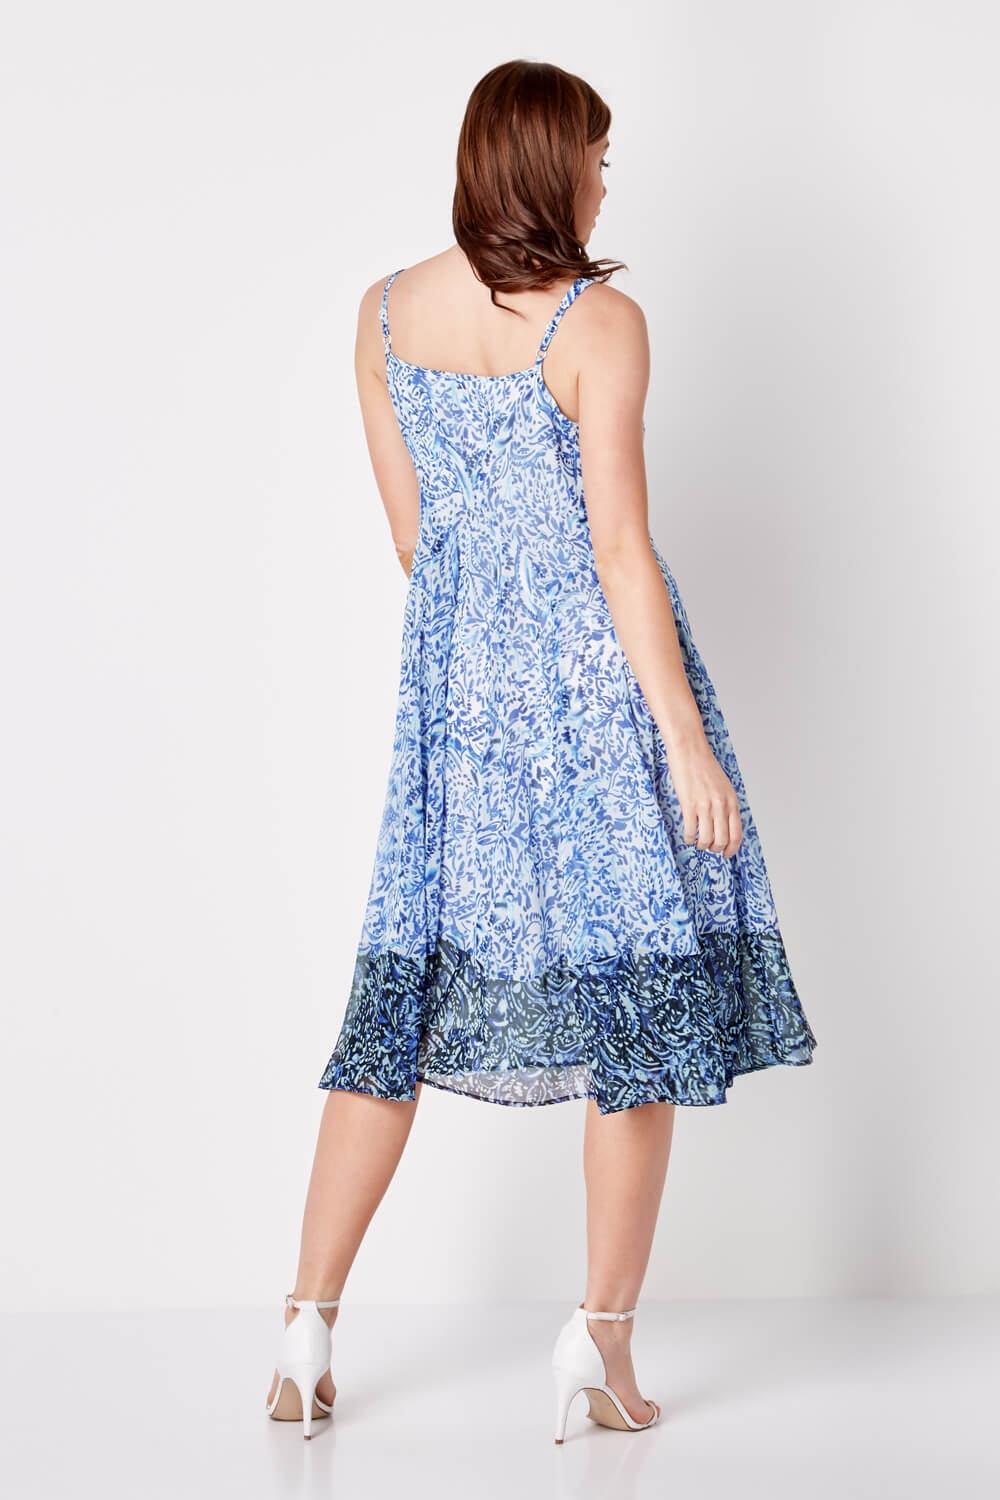 Blue Paisley Print Fit and Flare Dress, Image 2 of 3